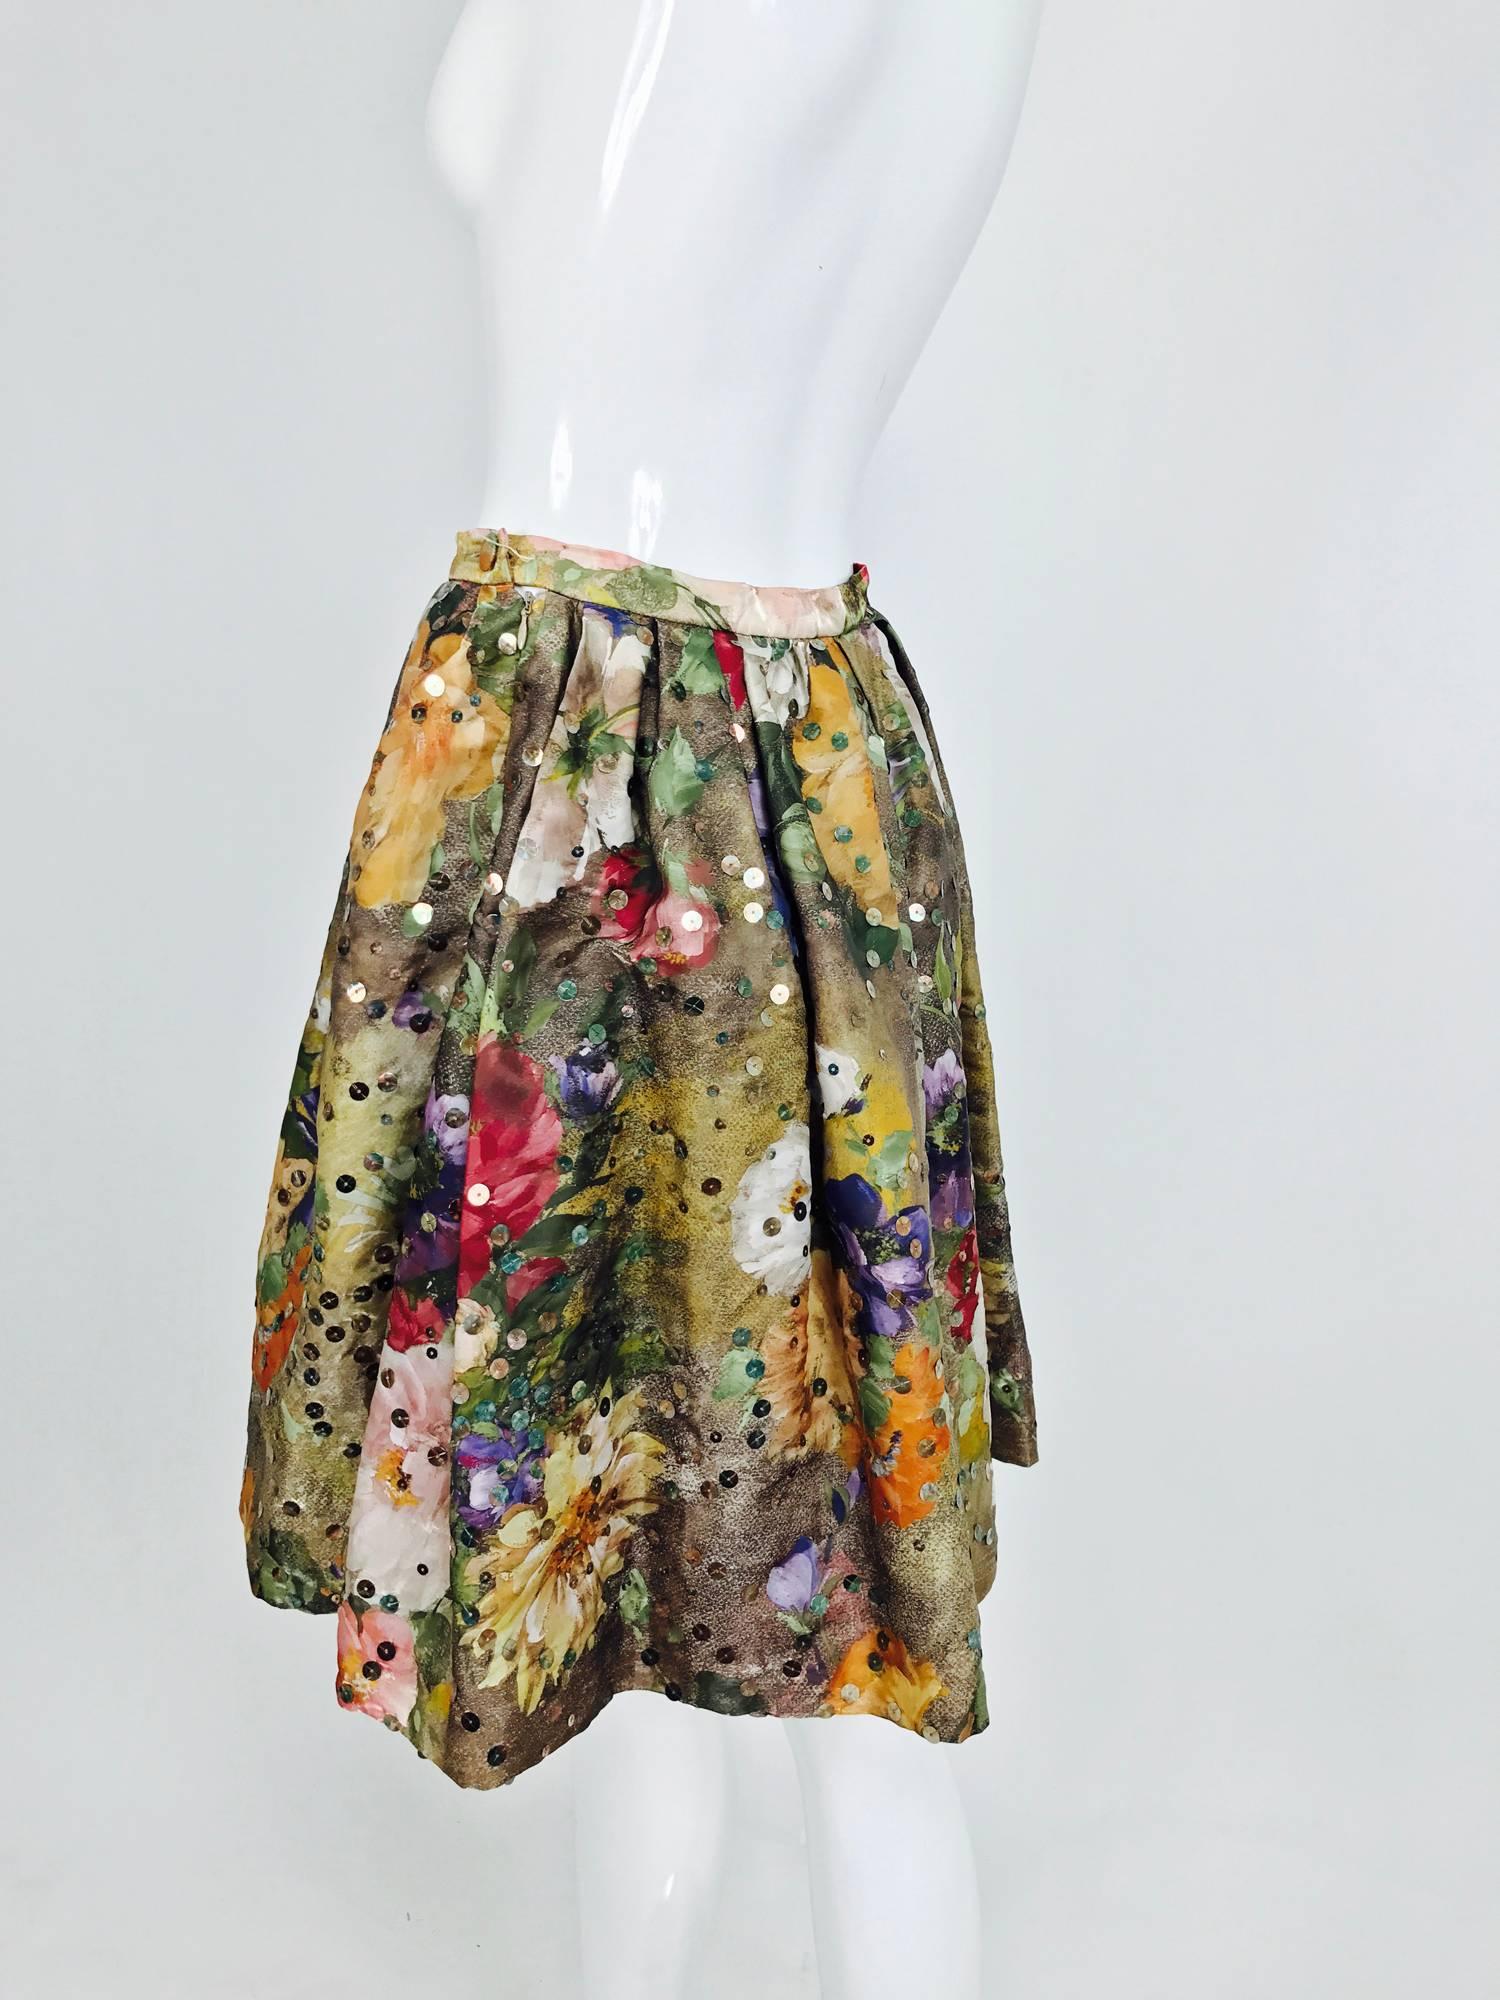 Women's Vintage Christian LaCroix sequined floral satin open pleated skirt 1980s